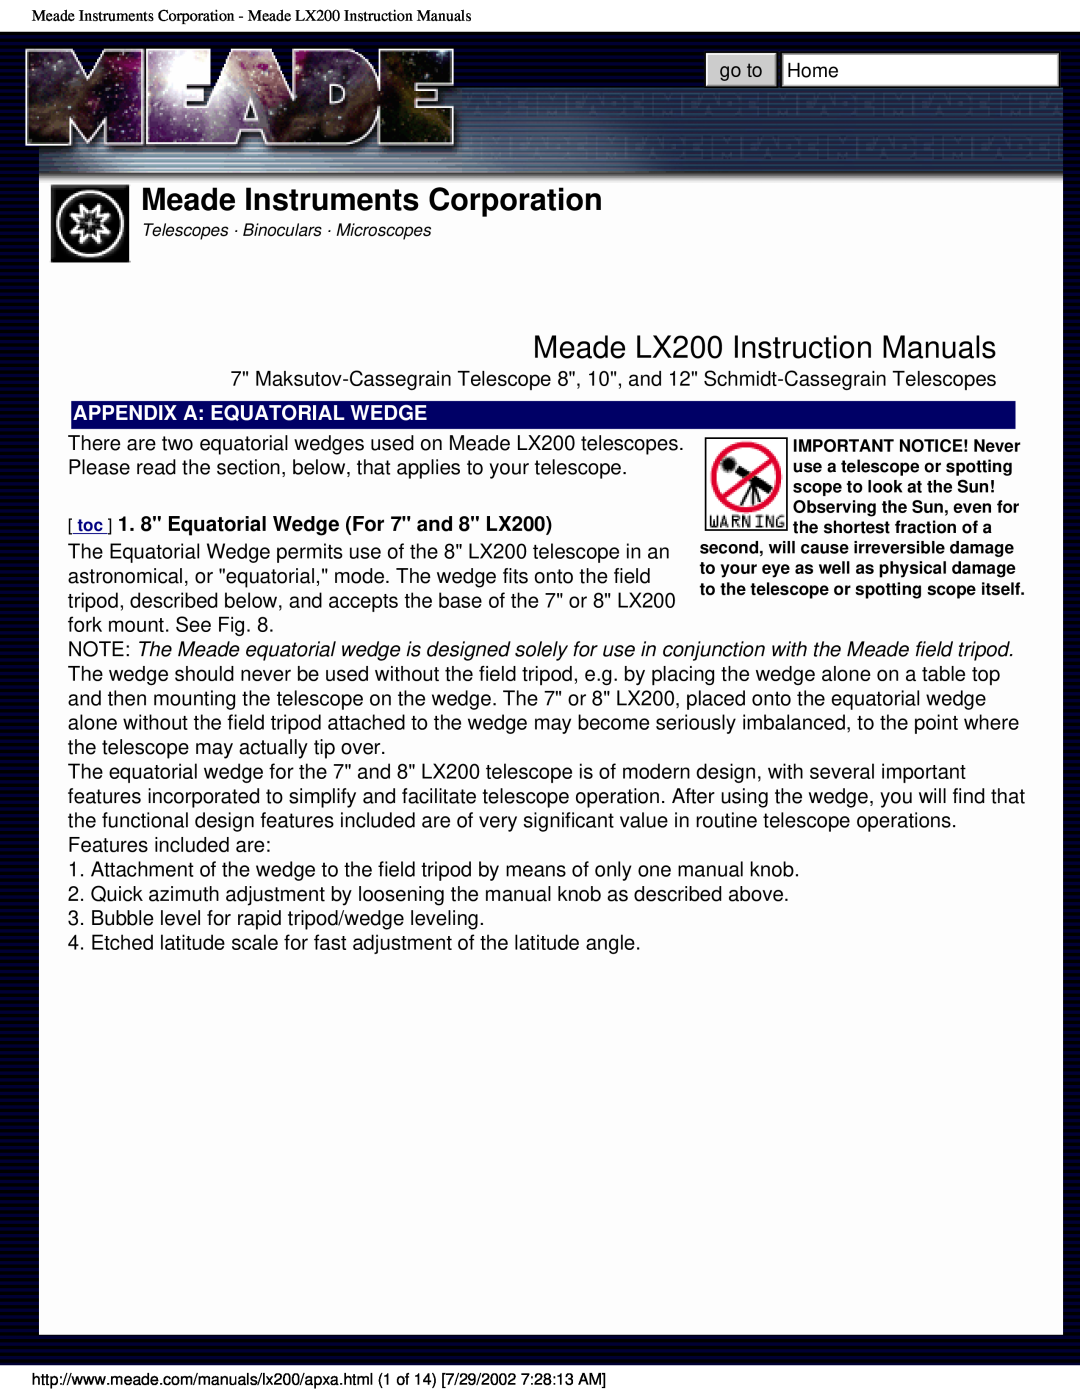 Meade instruction manual Meade Instruments Corporation, Meade LX200 Instruction Manuals, Appendix A: Equatorial Wedge 